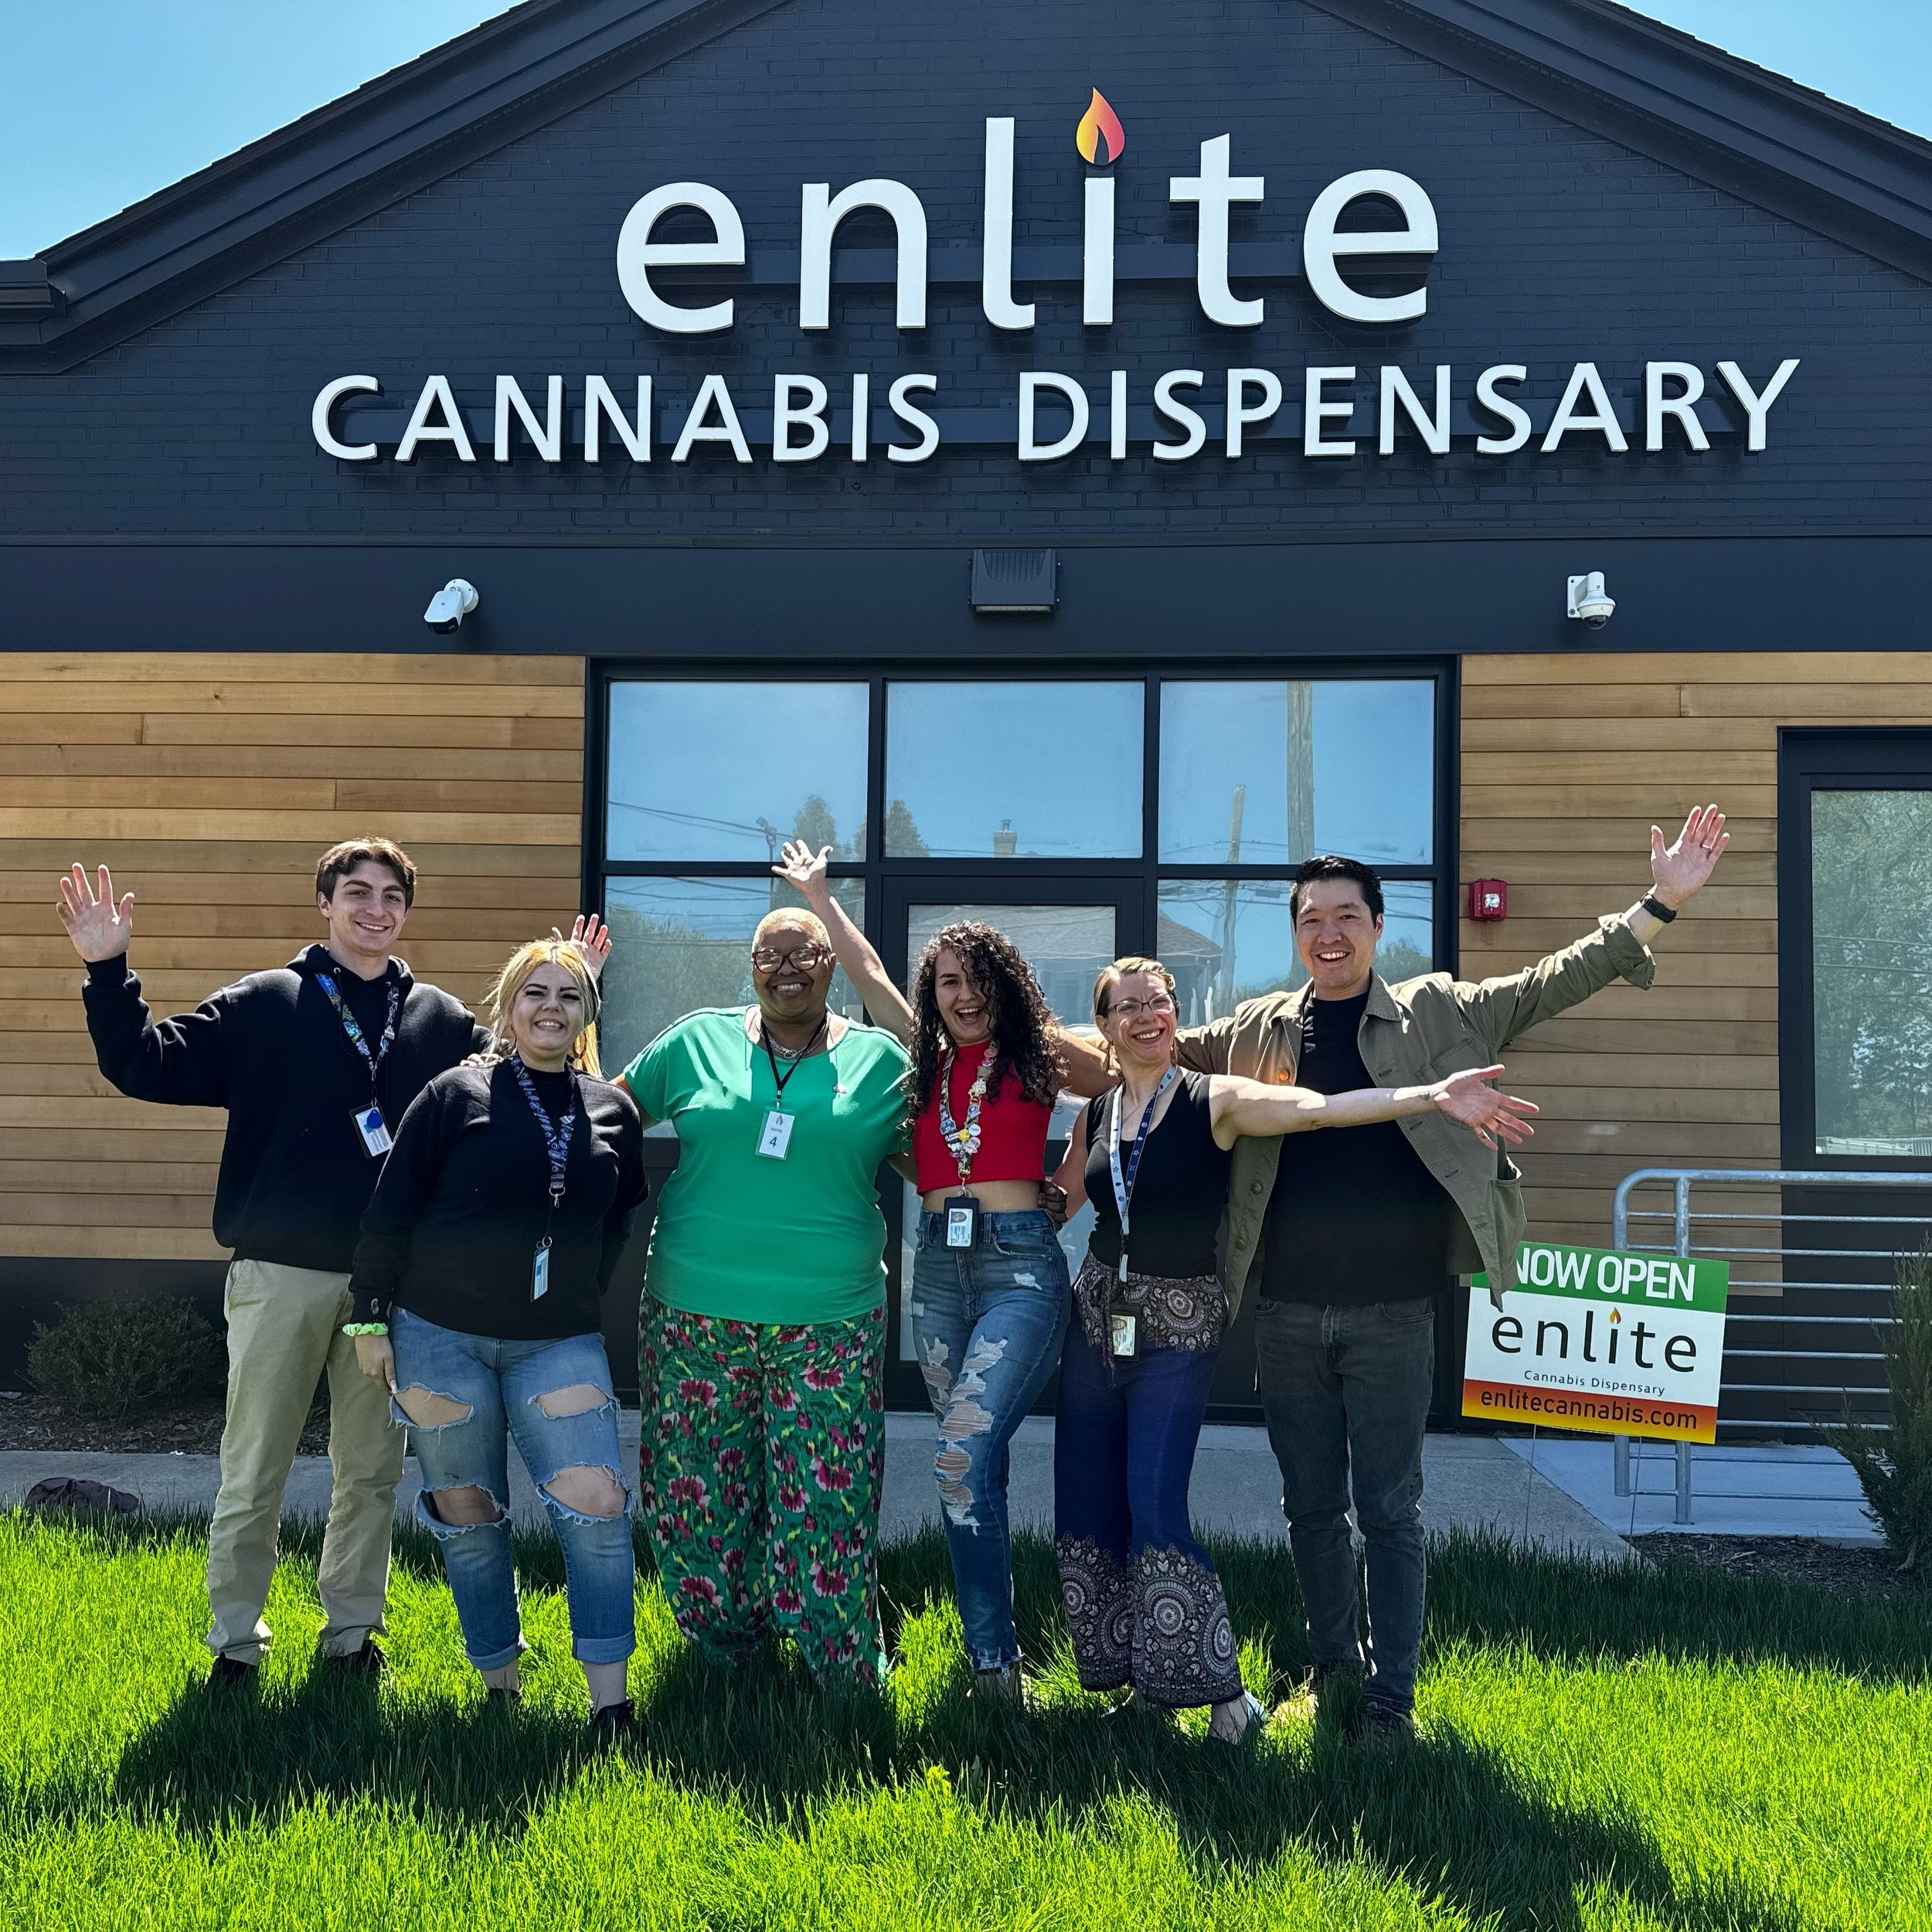 It&rsquo;s been ONE WEEK since we opened our location in #IndianOrchard. 🍃💚💨 We&rsquo;ve had a blast getting to know everyone in the area. Have you had a chance to stop in? Come visit and see what&rsquo;s going on - we&rsquo;ve got something for e